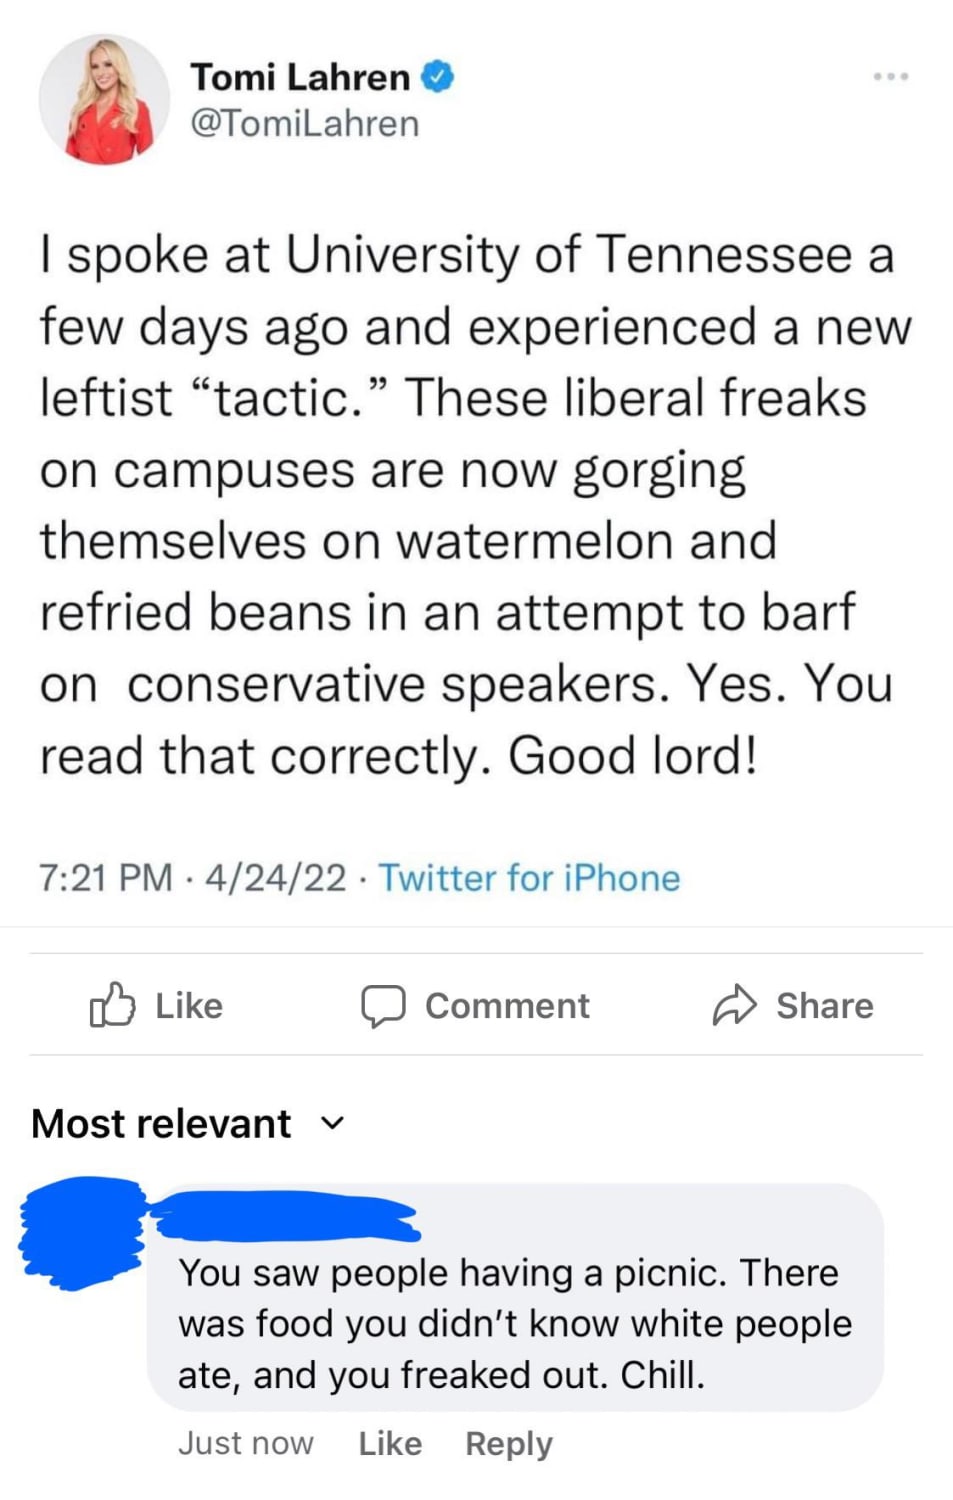 These liberal freaks on campuses are now gorging themselves with watermelon and refried beans in an attempt to barf on conservative speakers.